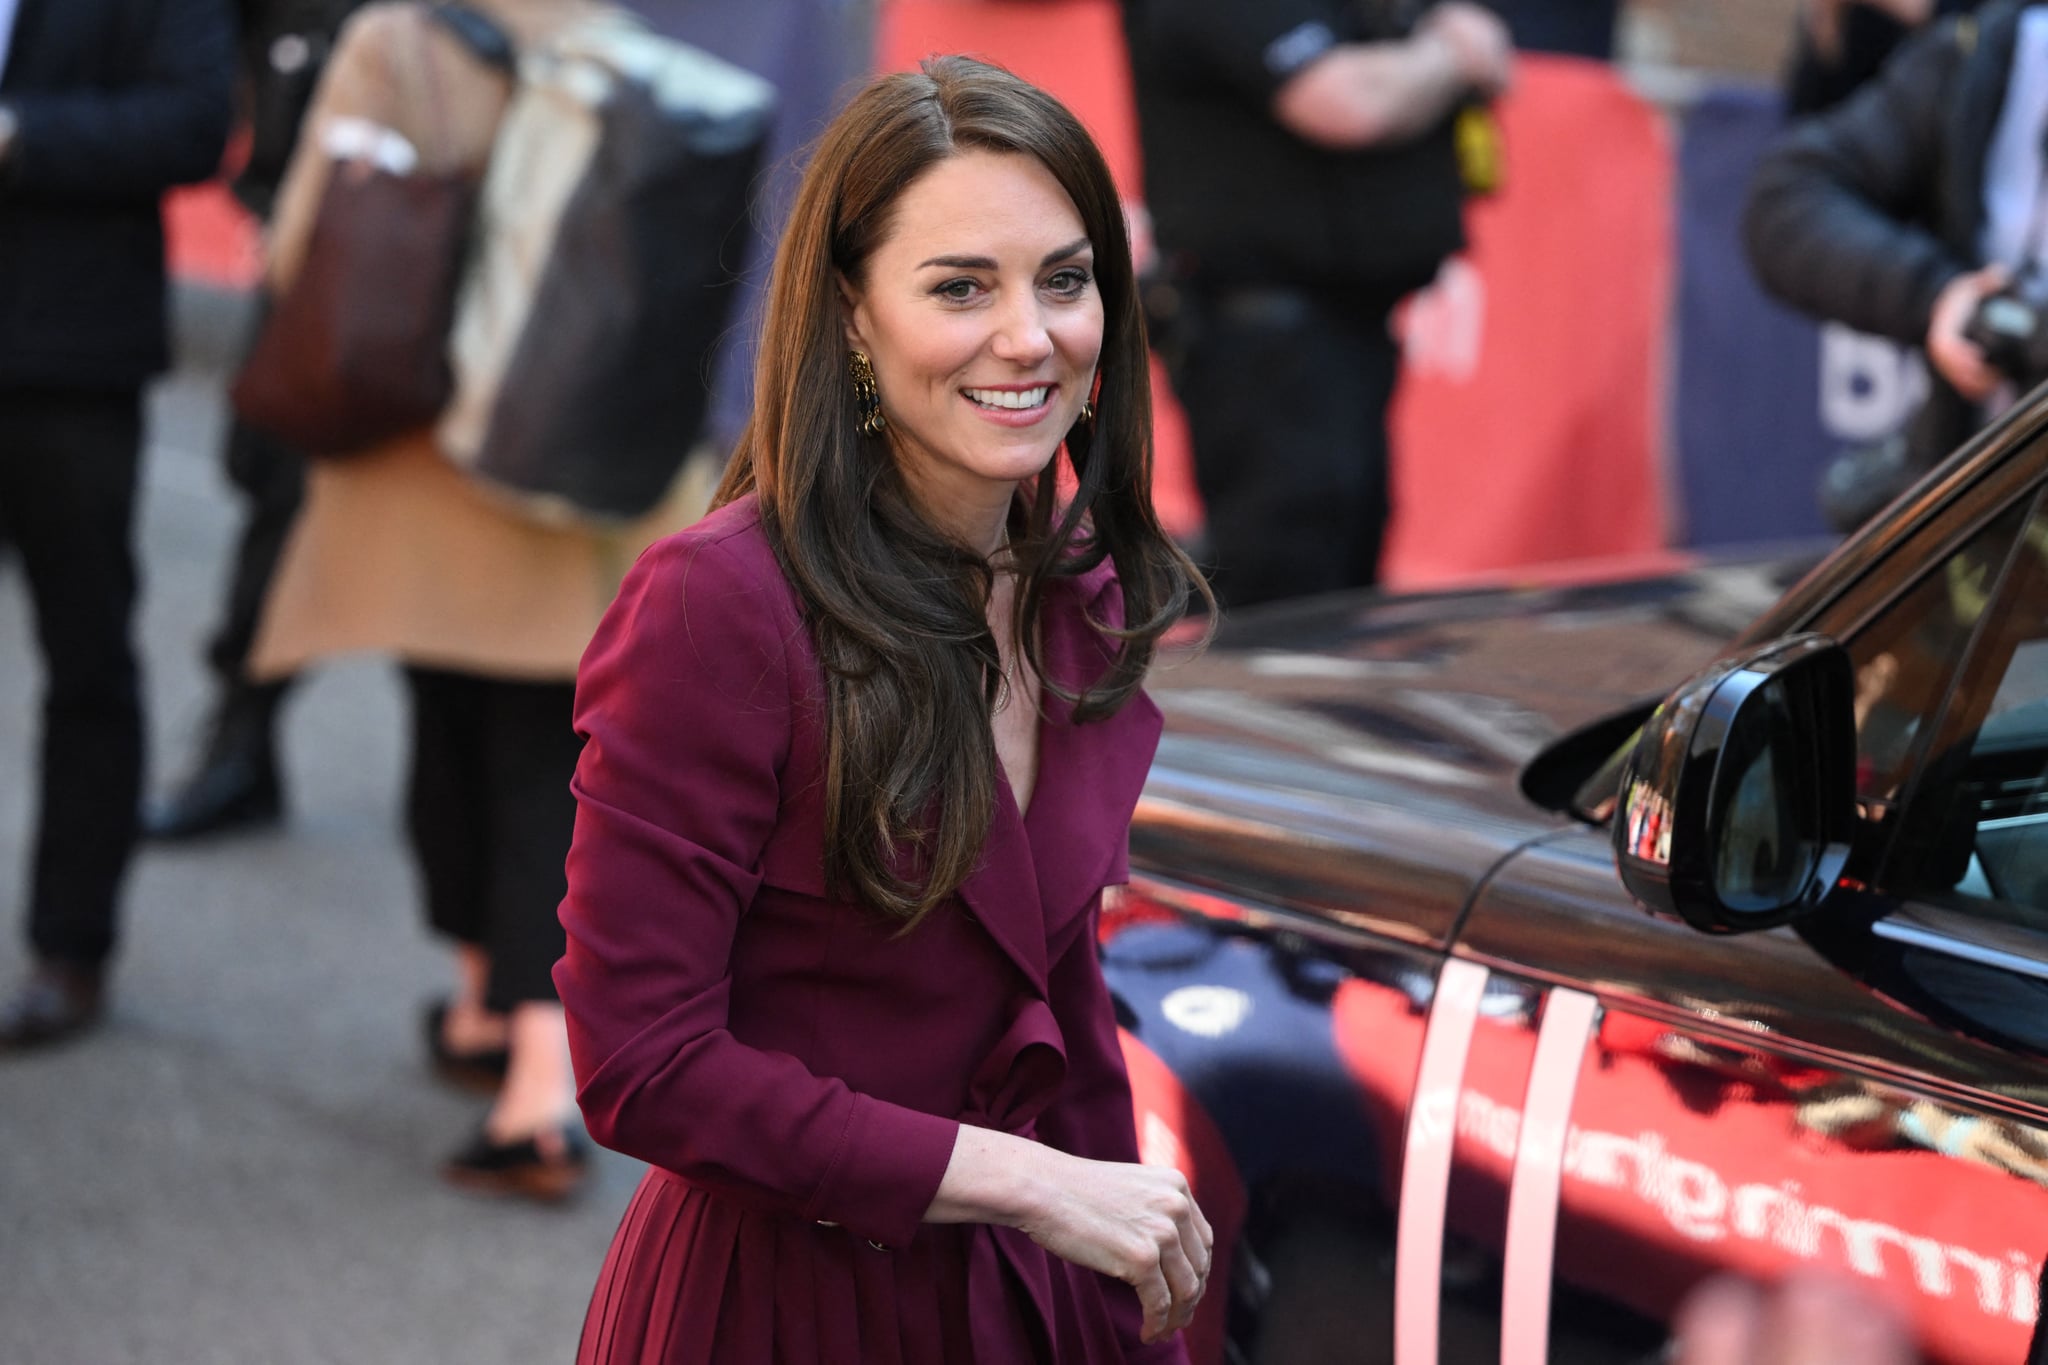 Britain's Catherine, Princess of Wales smiles as she leaves having met members of the public during a visit to Birmingham on April 20, 2023. (Photo by Oli SCARFF / AFP) (Photo by OLI SCARFF/AFP via Getty Images)